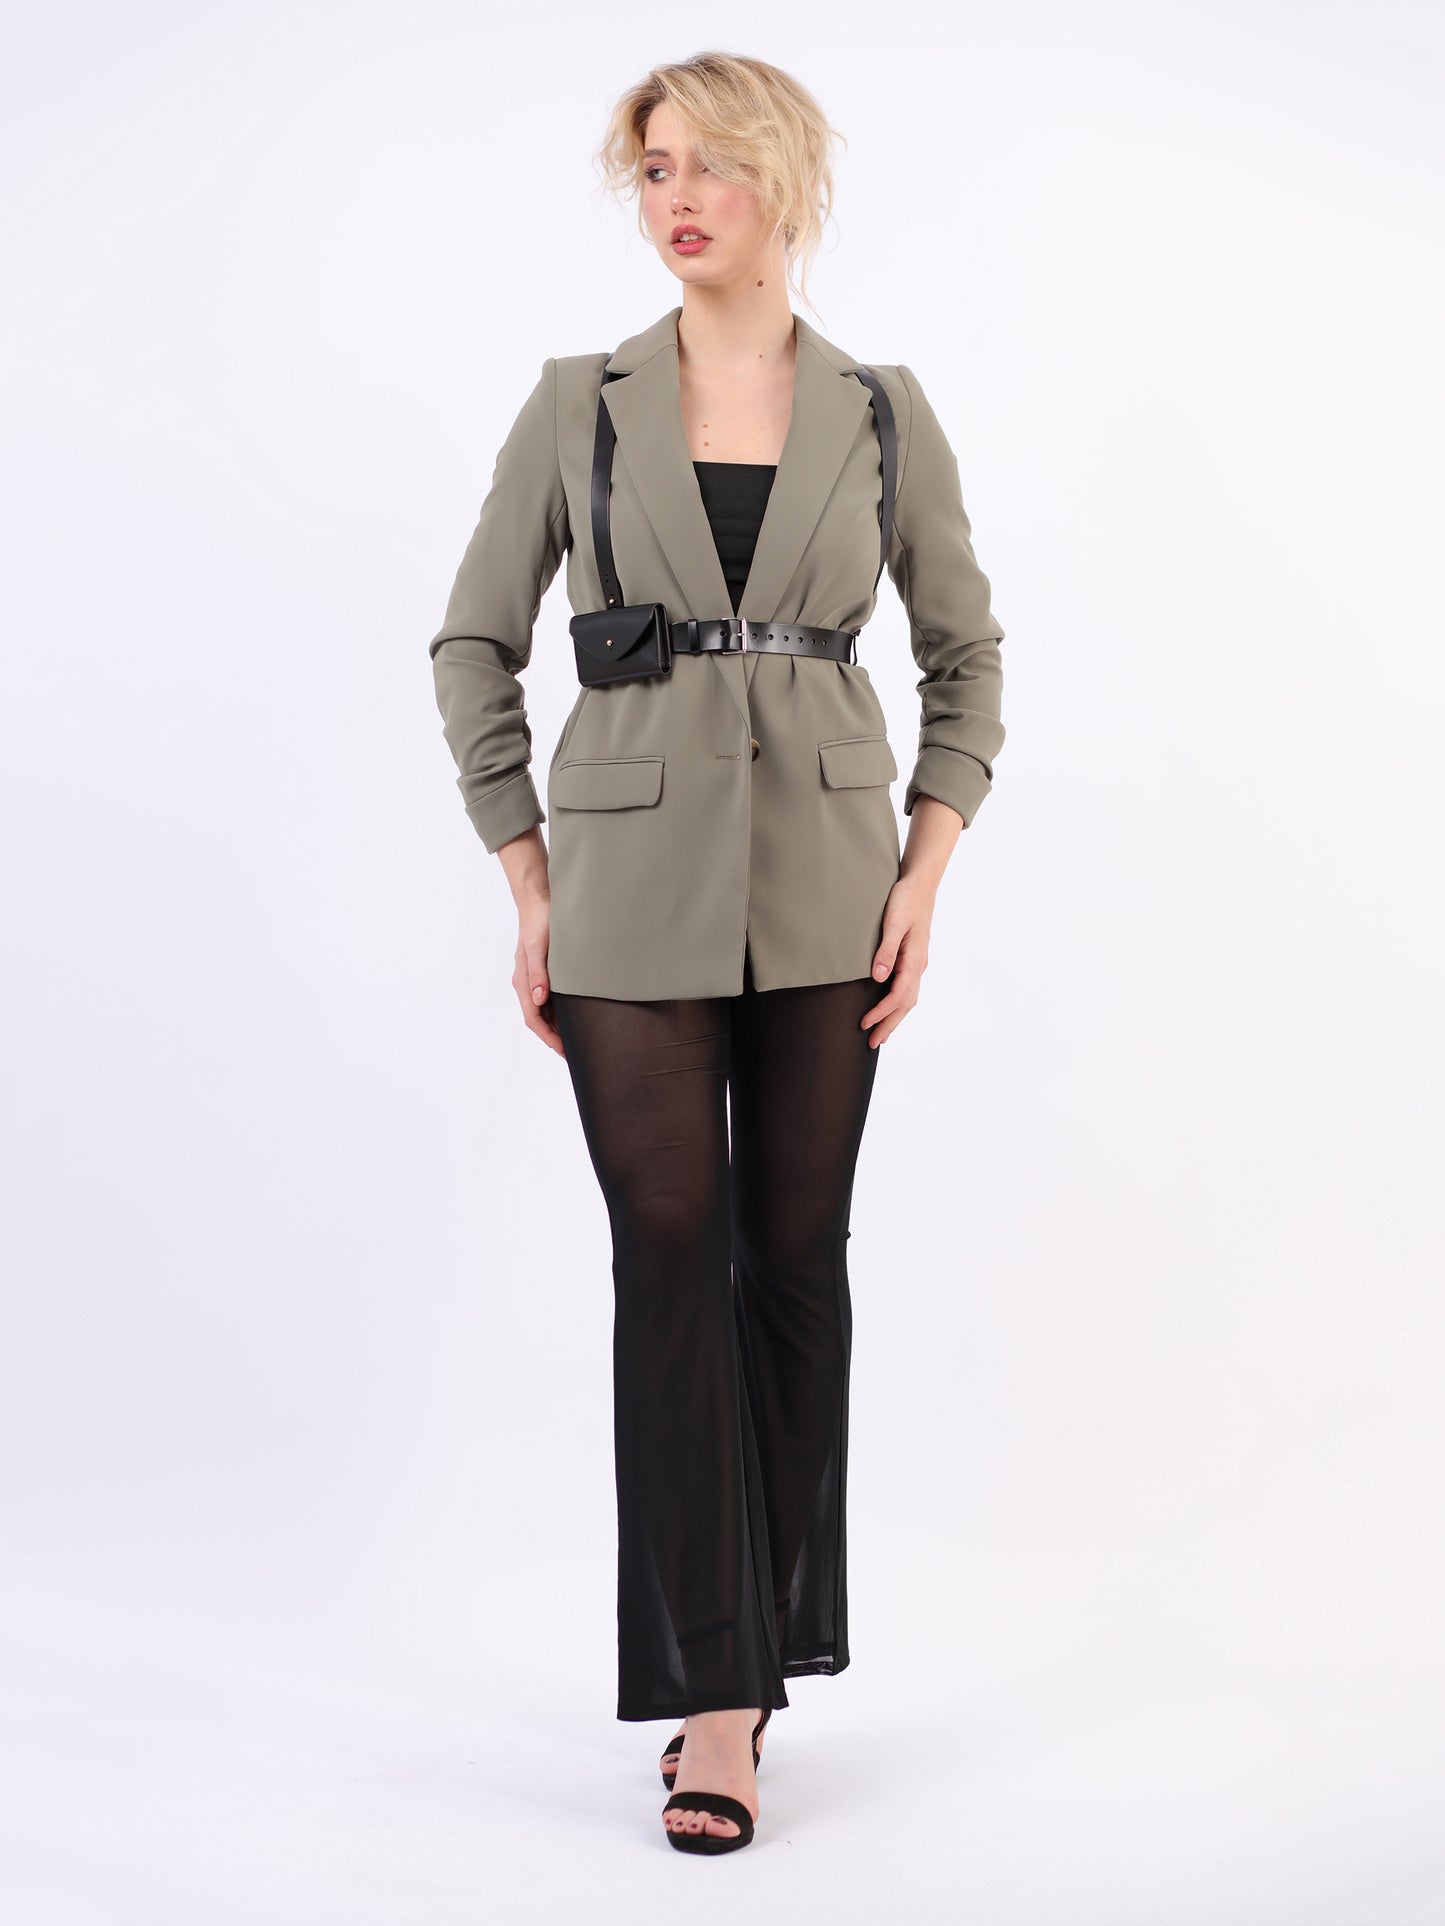 Black slim envelope harness fitted on woman wearing green blazer and black trousers.